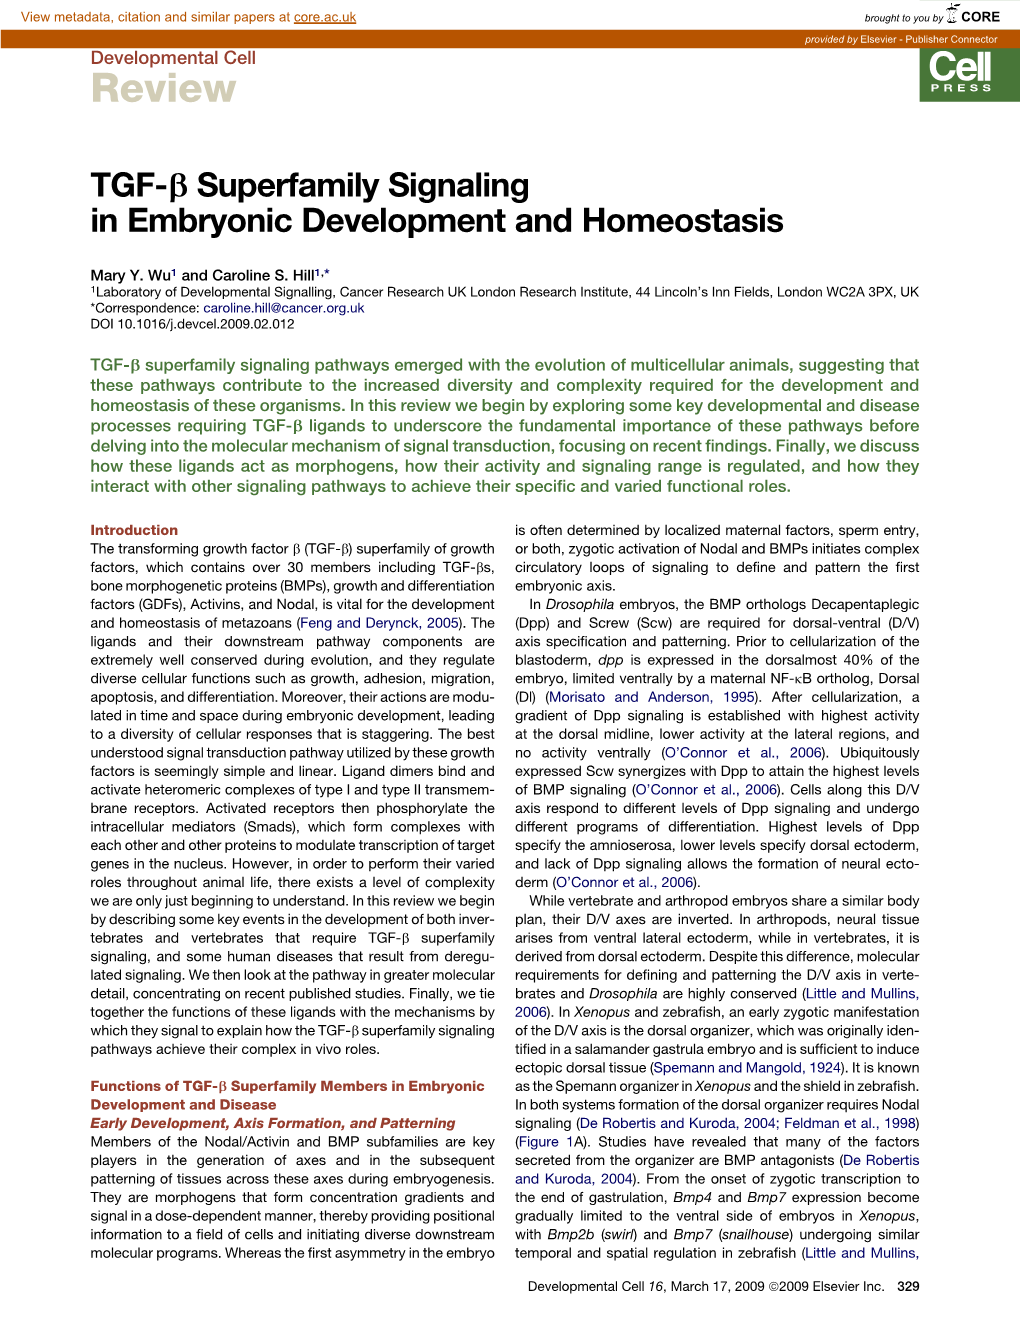 TGF-B Superfamily Signaling in Embryonic Development and Homeostasis